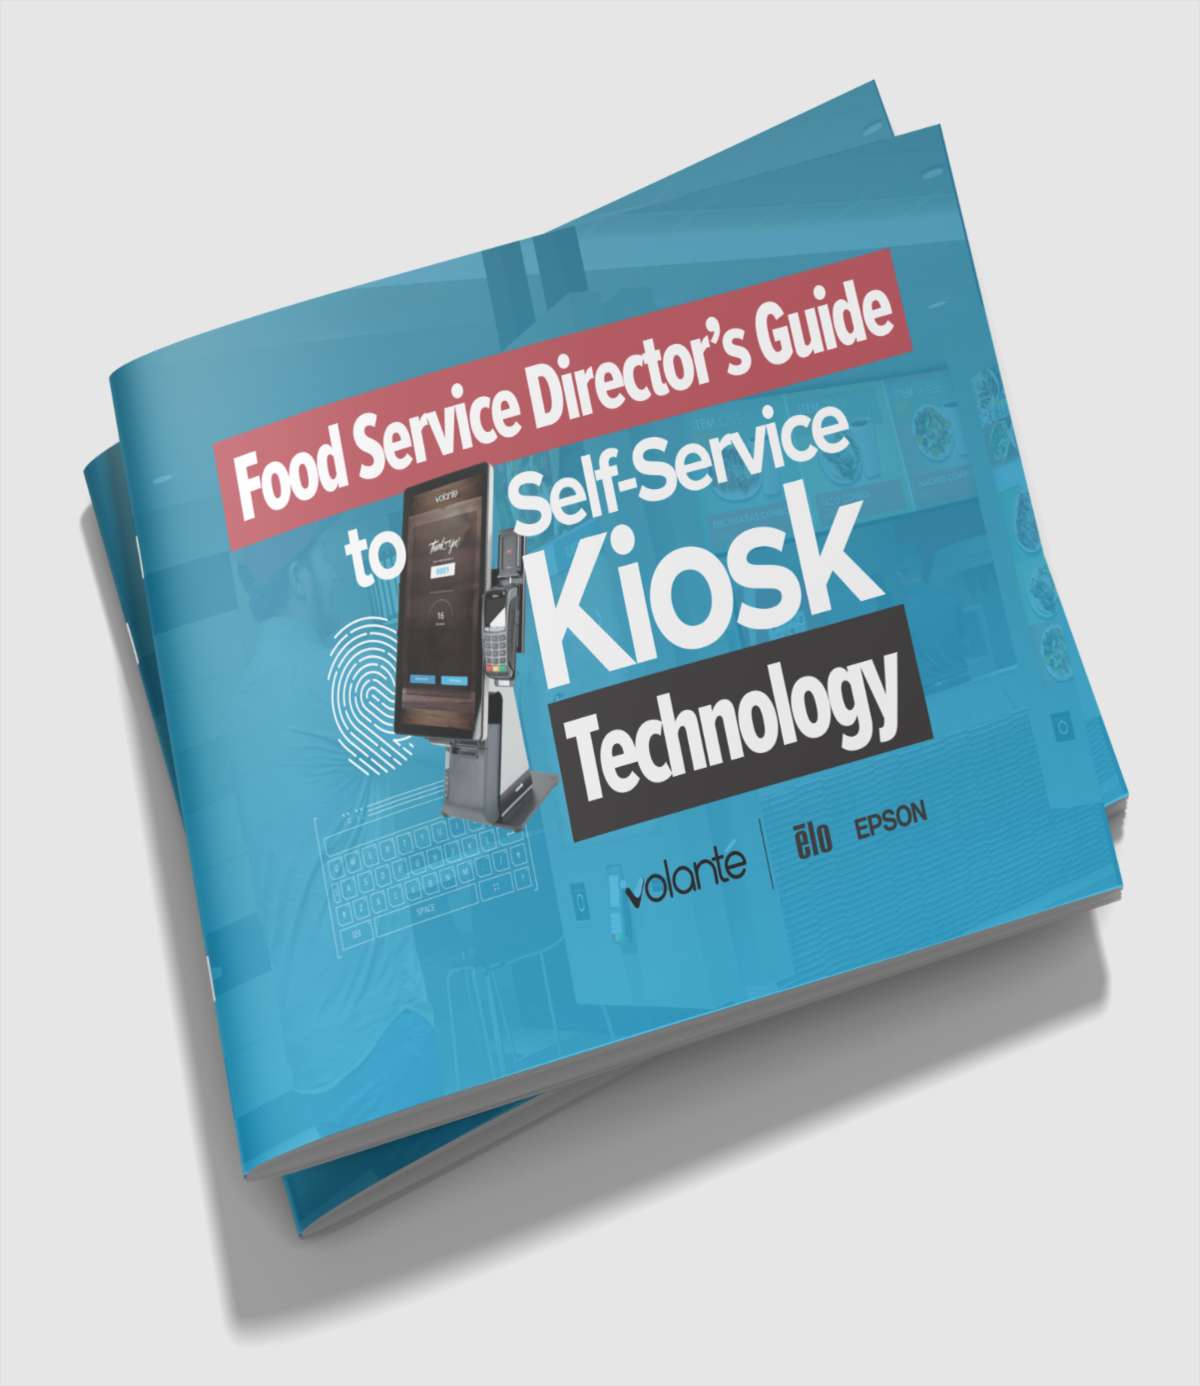 Food Service Director's Guide to Self-Service Kiosk Technology